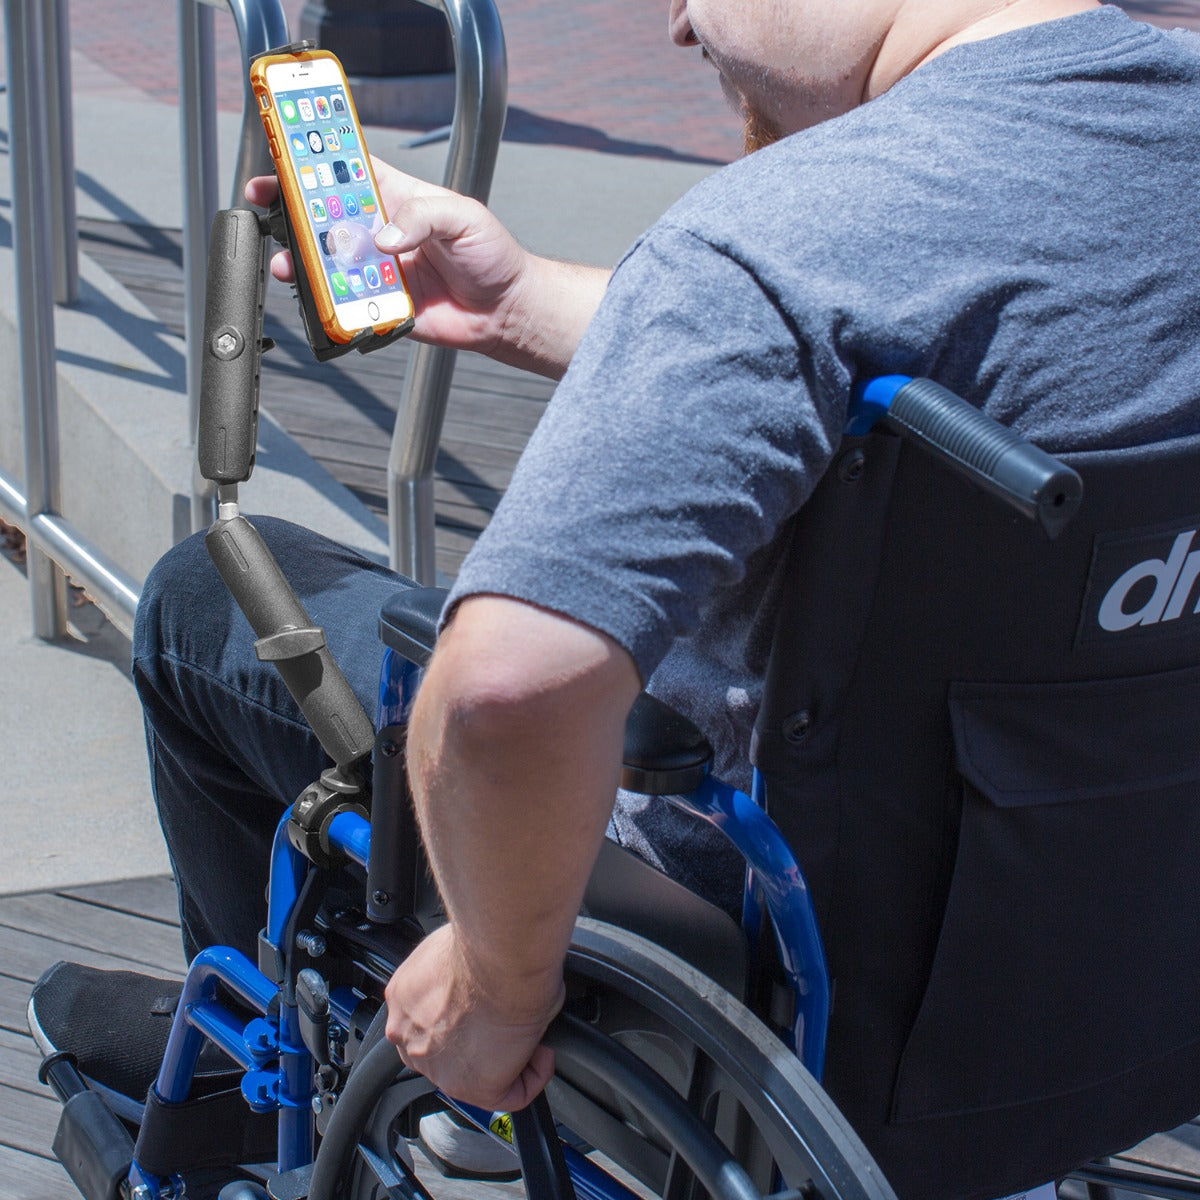 iBOLT™ sPro2™ AccessiBOLT™ Post/Pole/Rail/Handlebar Mount for Wheelchairs/Exercise Equipment